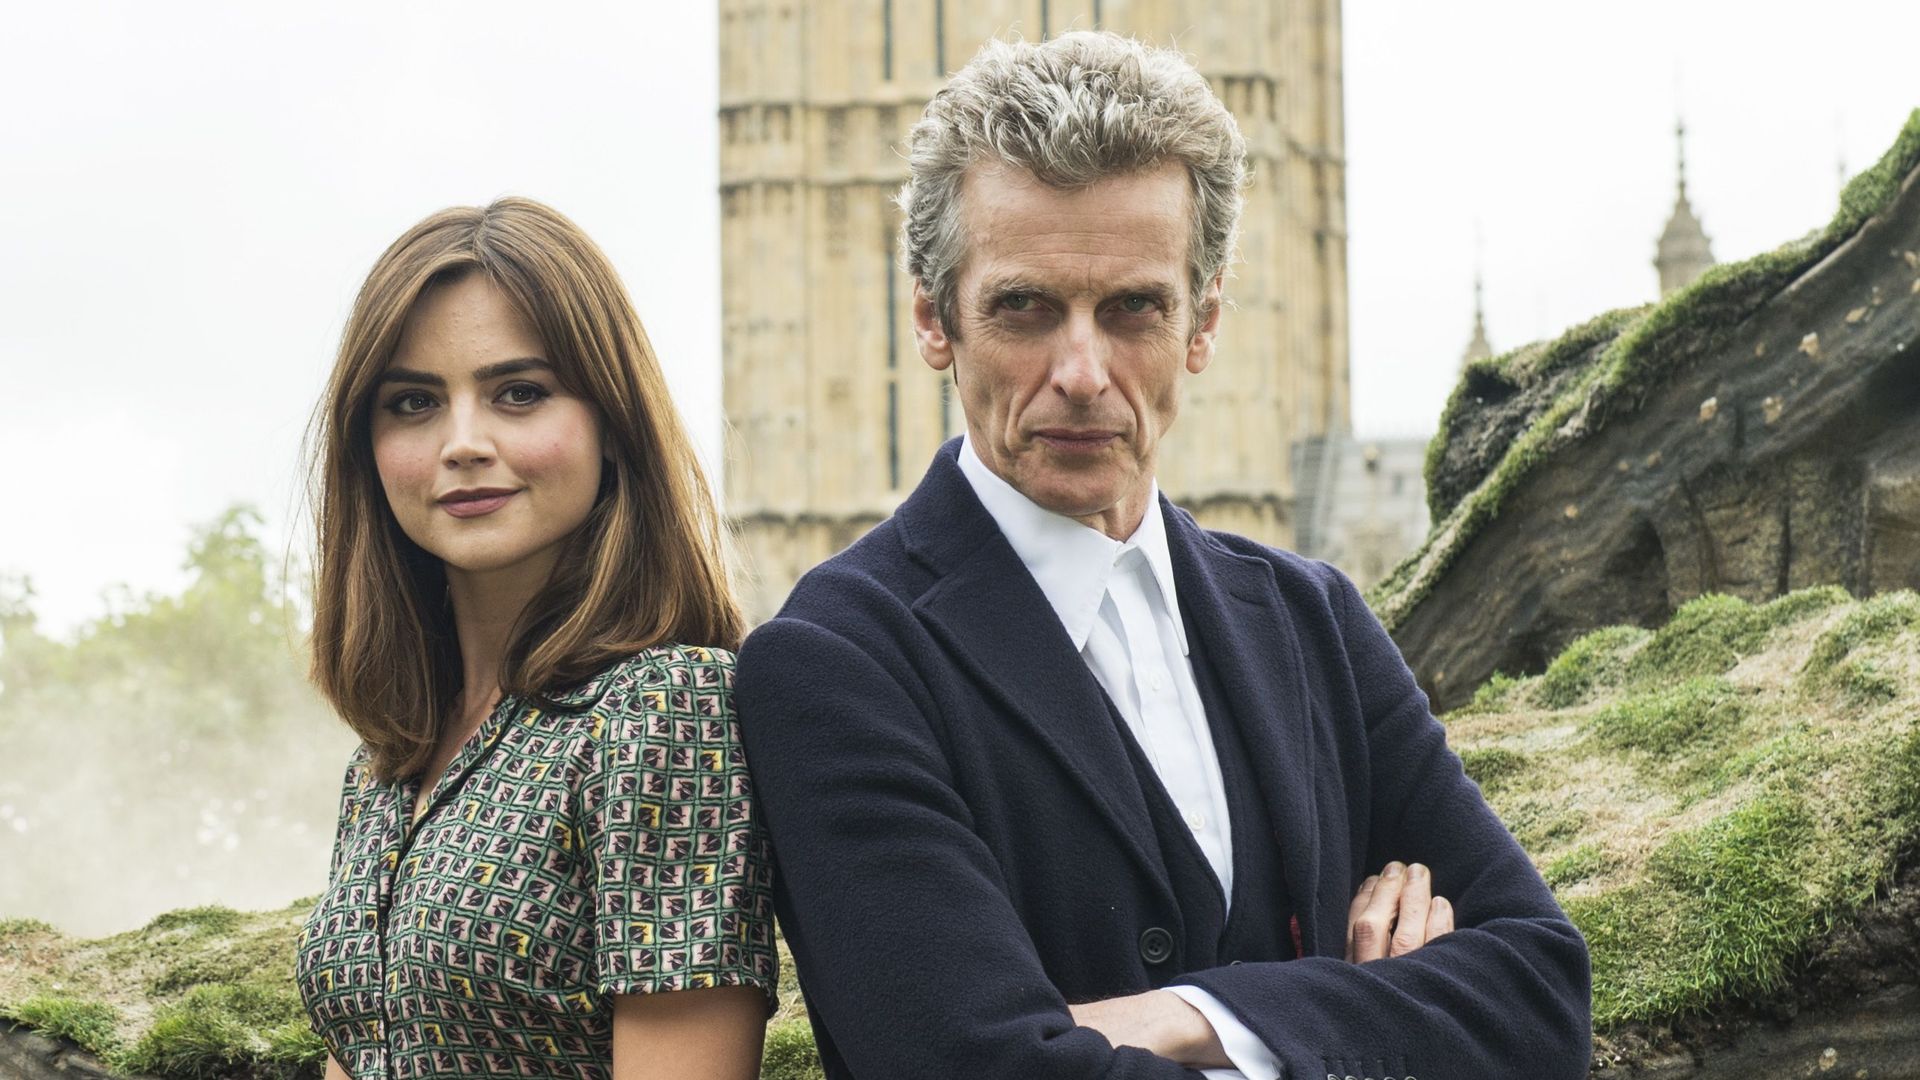 Jenna Coleman and Peter Capaldi in character as Clara Oswald and The Doctor